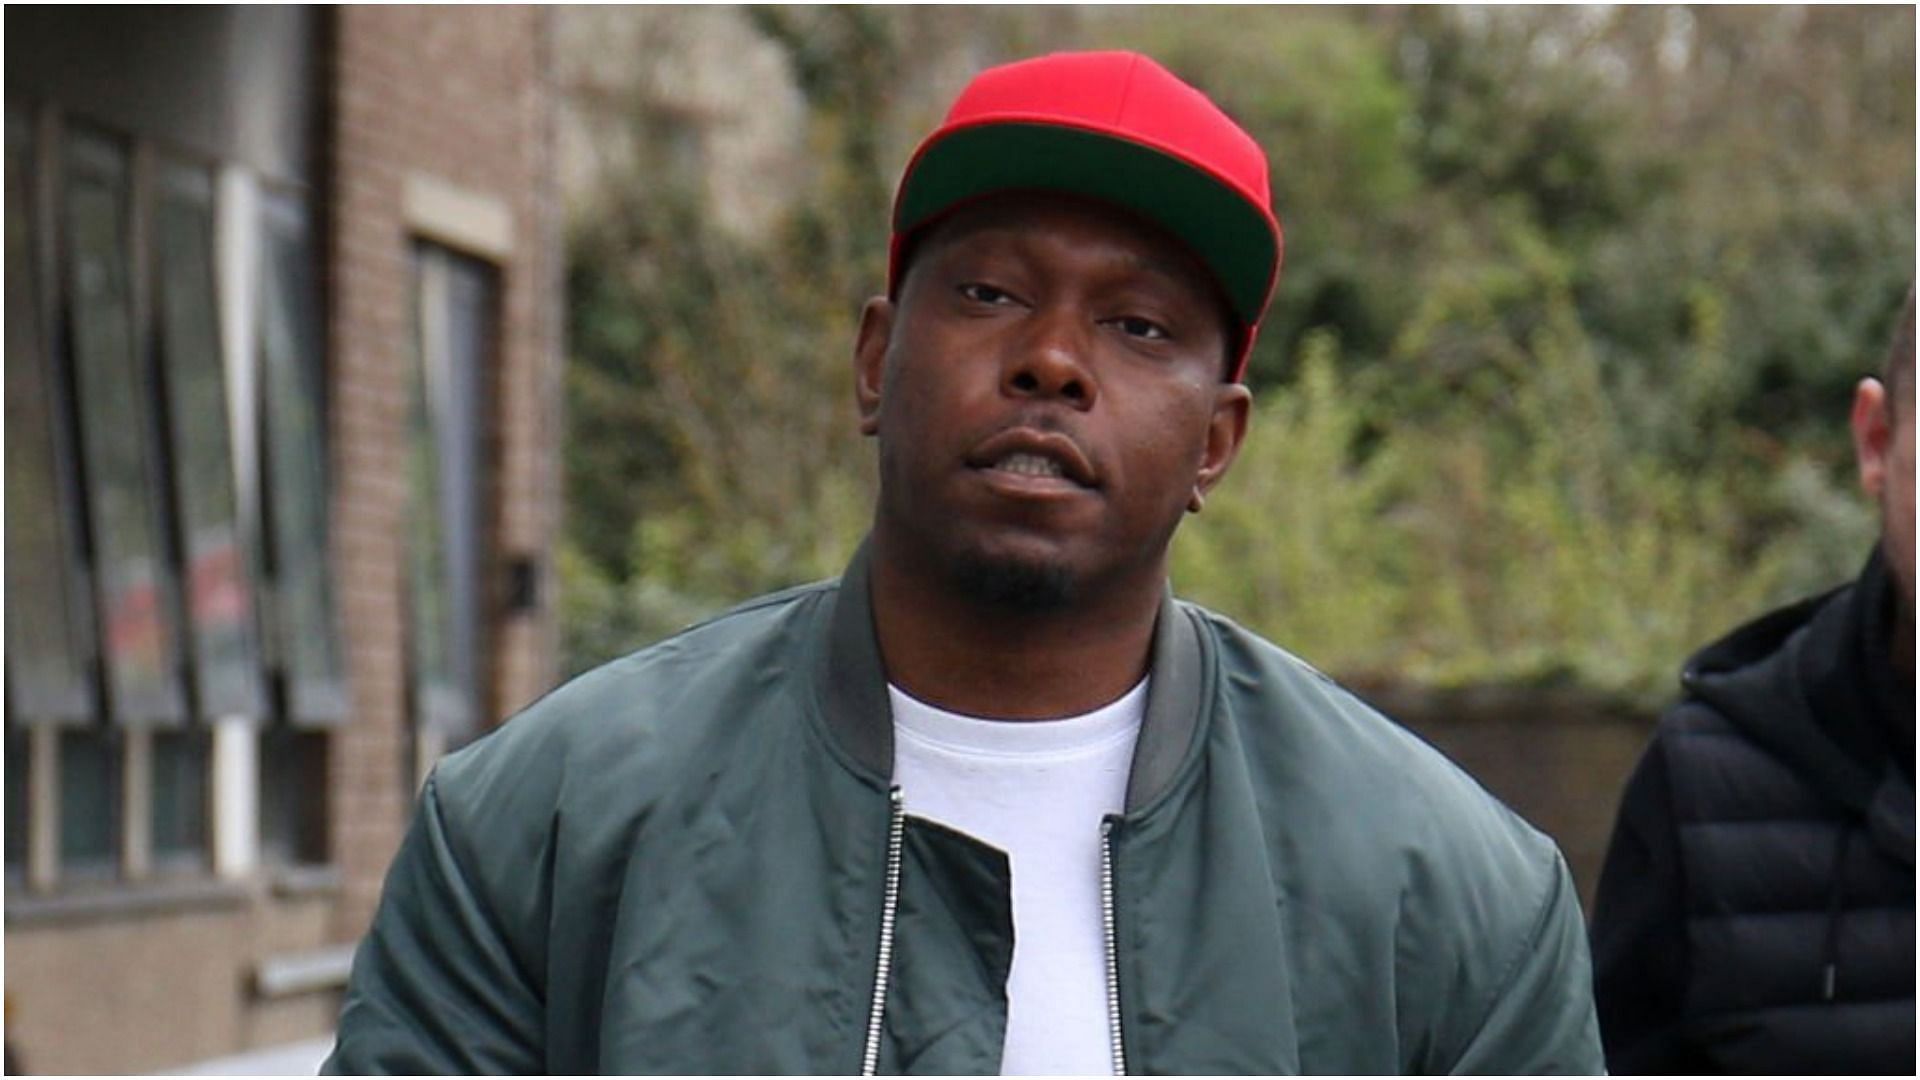 Dizzee Rascal has been sentenced to a curfew and restraining order for assaulting Cassandra Jones (Image via GC Images/Getty Images)